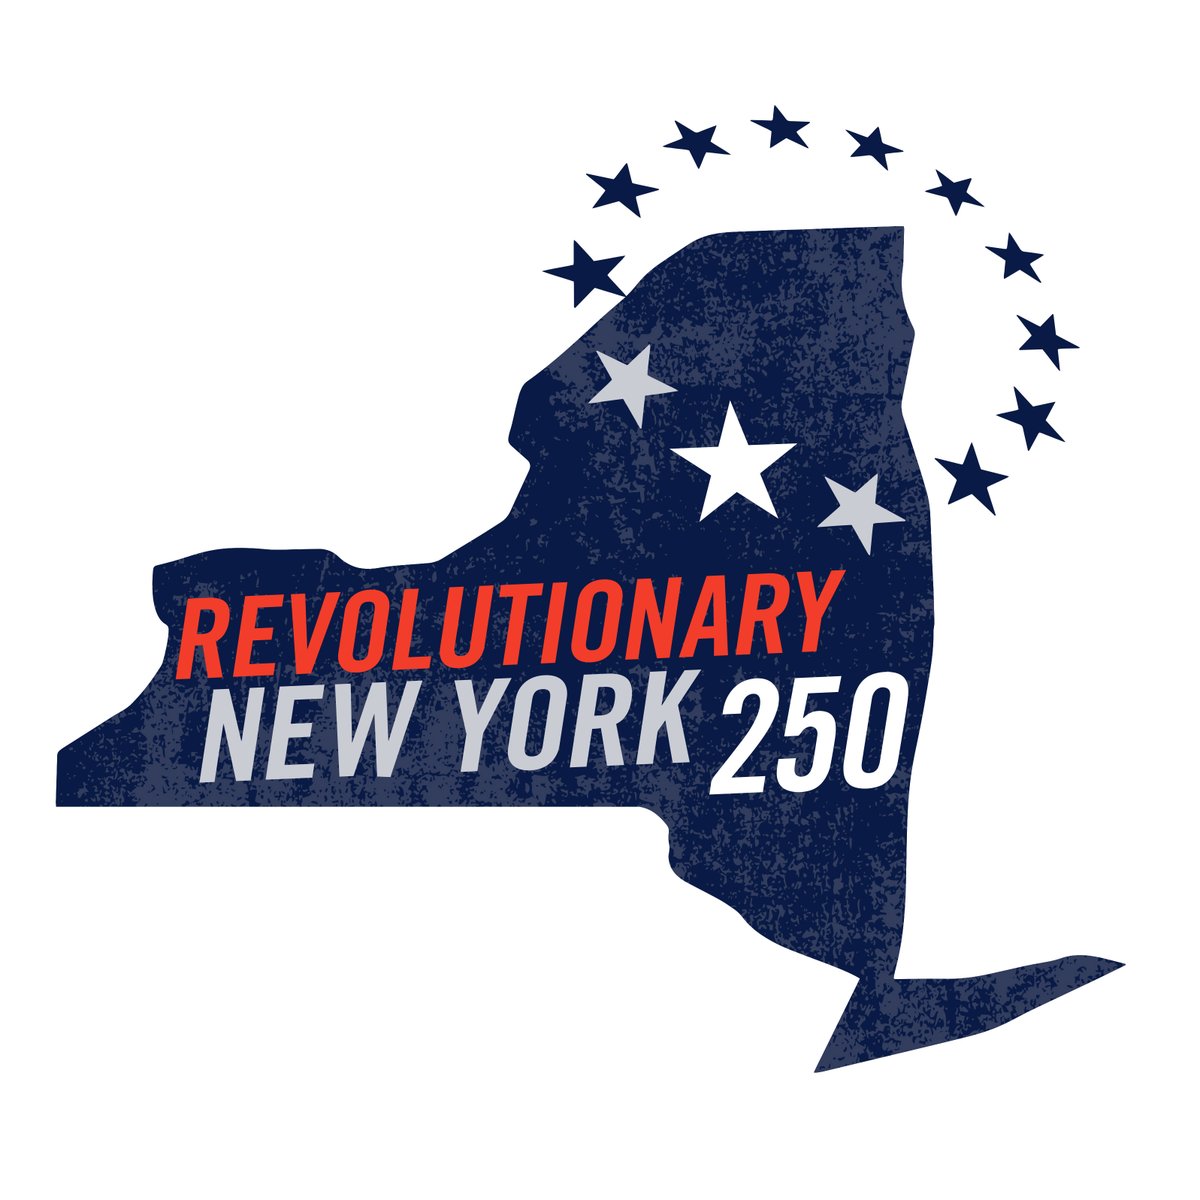 Save the Date! Wednesday, May 15, 10:30am Join the New York State 250th Commemoration Commission for its inaugural meeting at the NYSM's Huxley Theater. The meeting, open to the public, will also be available via live stream. → nysm.nysed.gov/revolutionaryn…